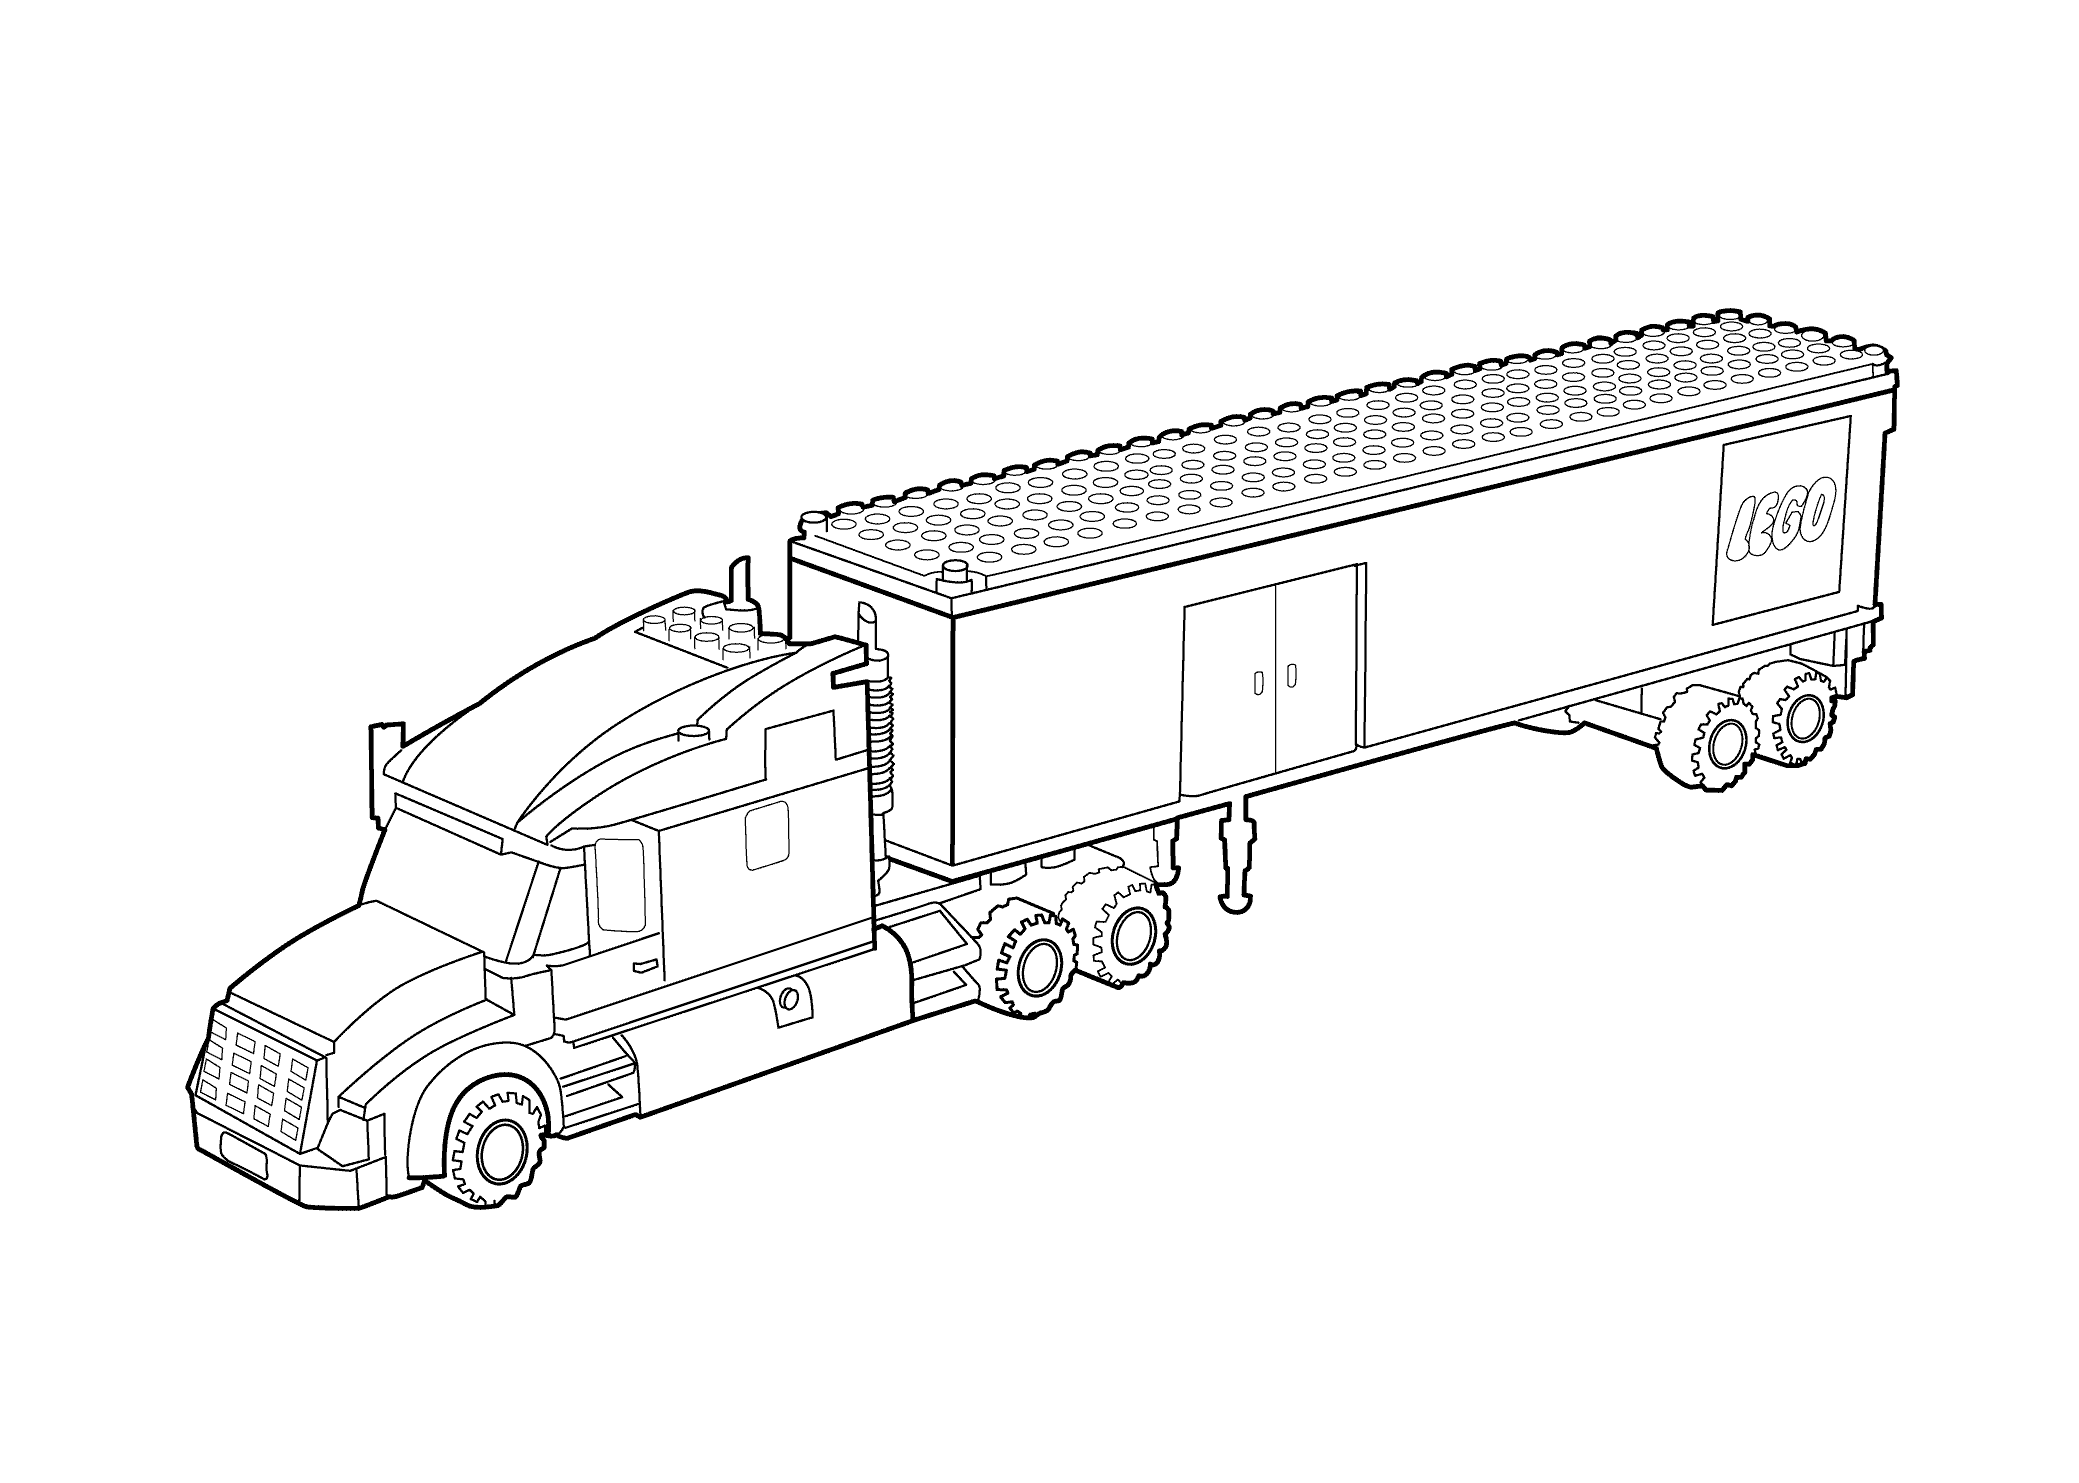 lego truck coloring pages lego coloring sheet 60073 service truck lego coloring pages coloring truck lego 